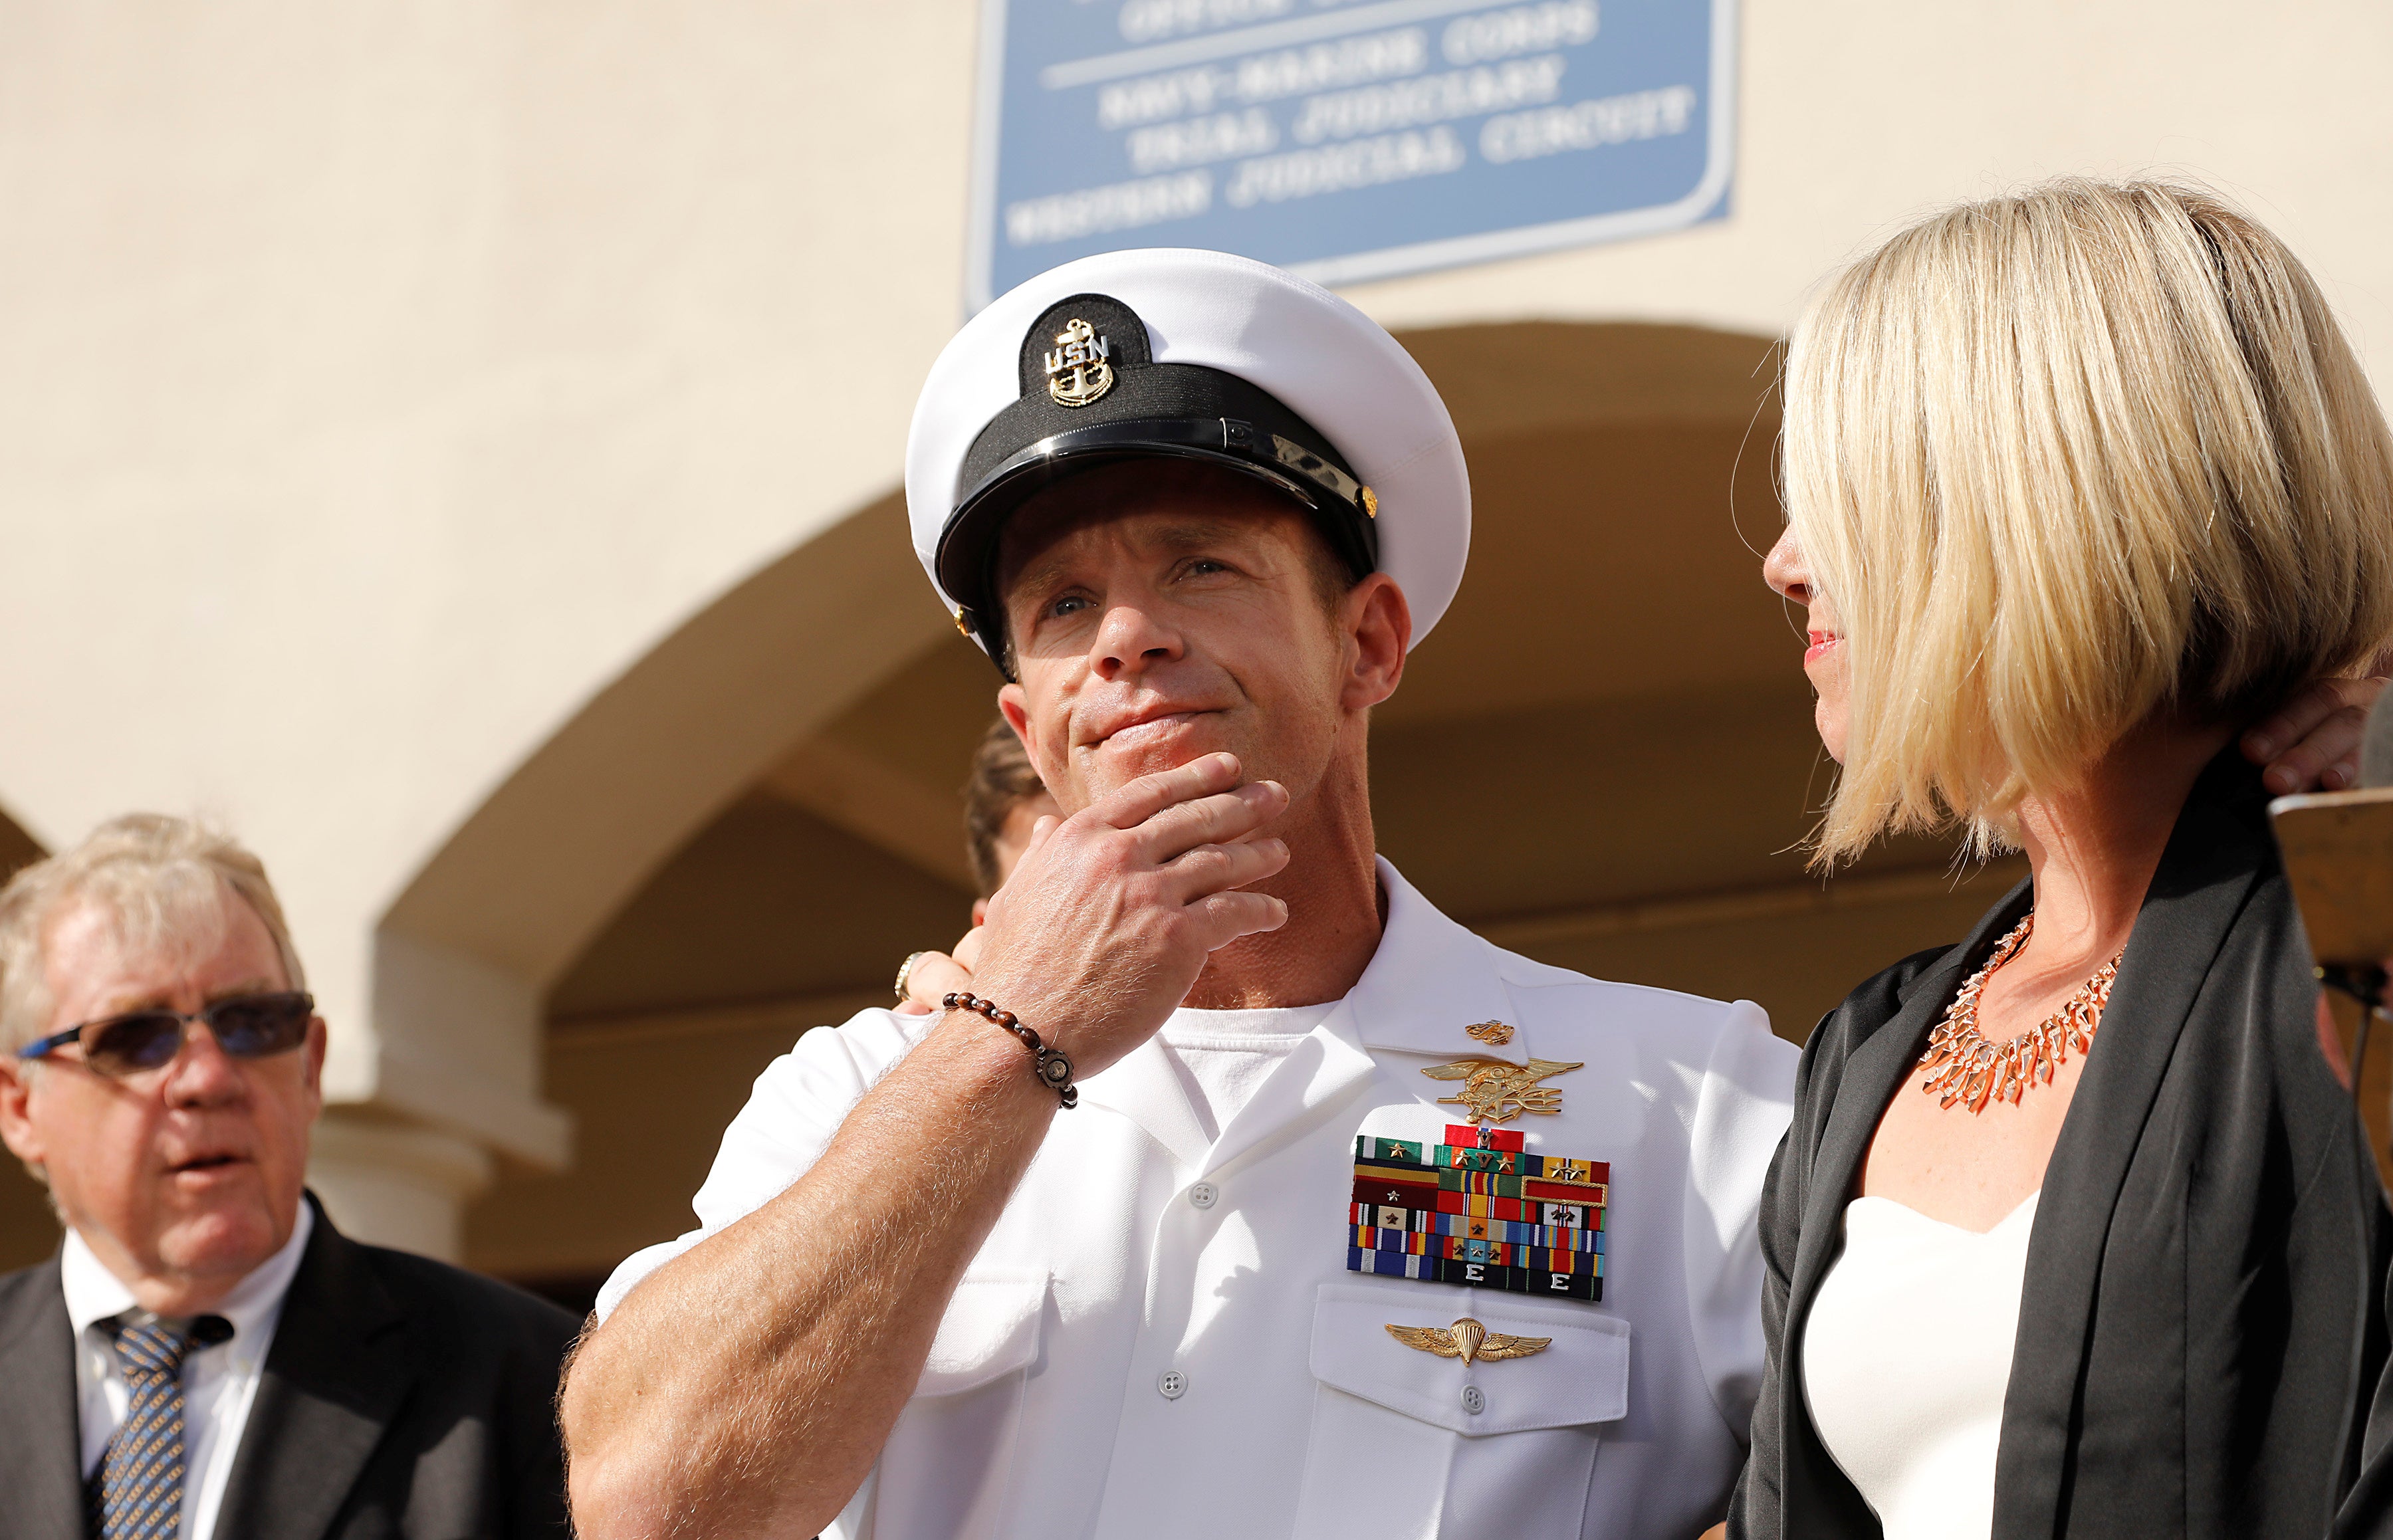 war crimes case of navy seal eddie gallagher expands to seal team 6 ahead of trial